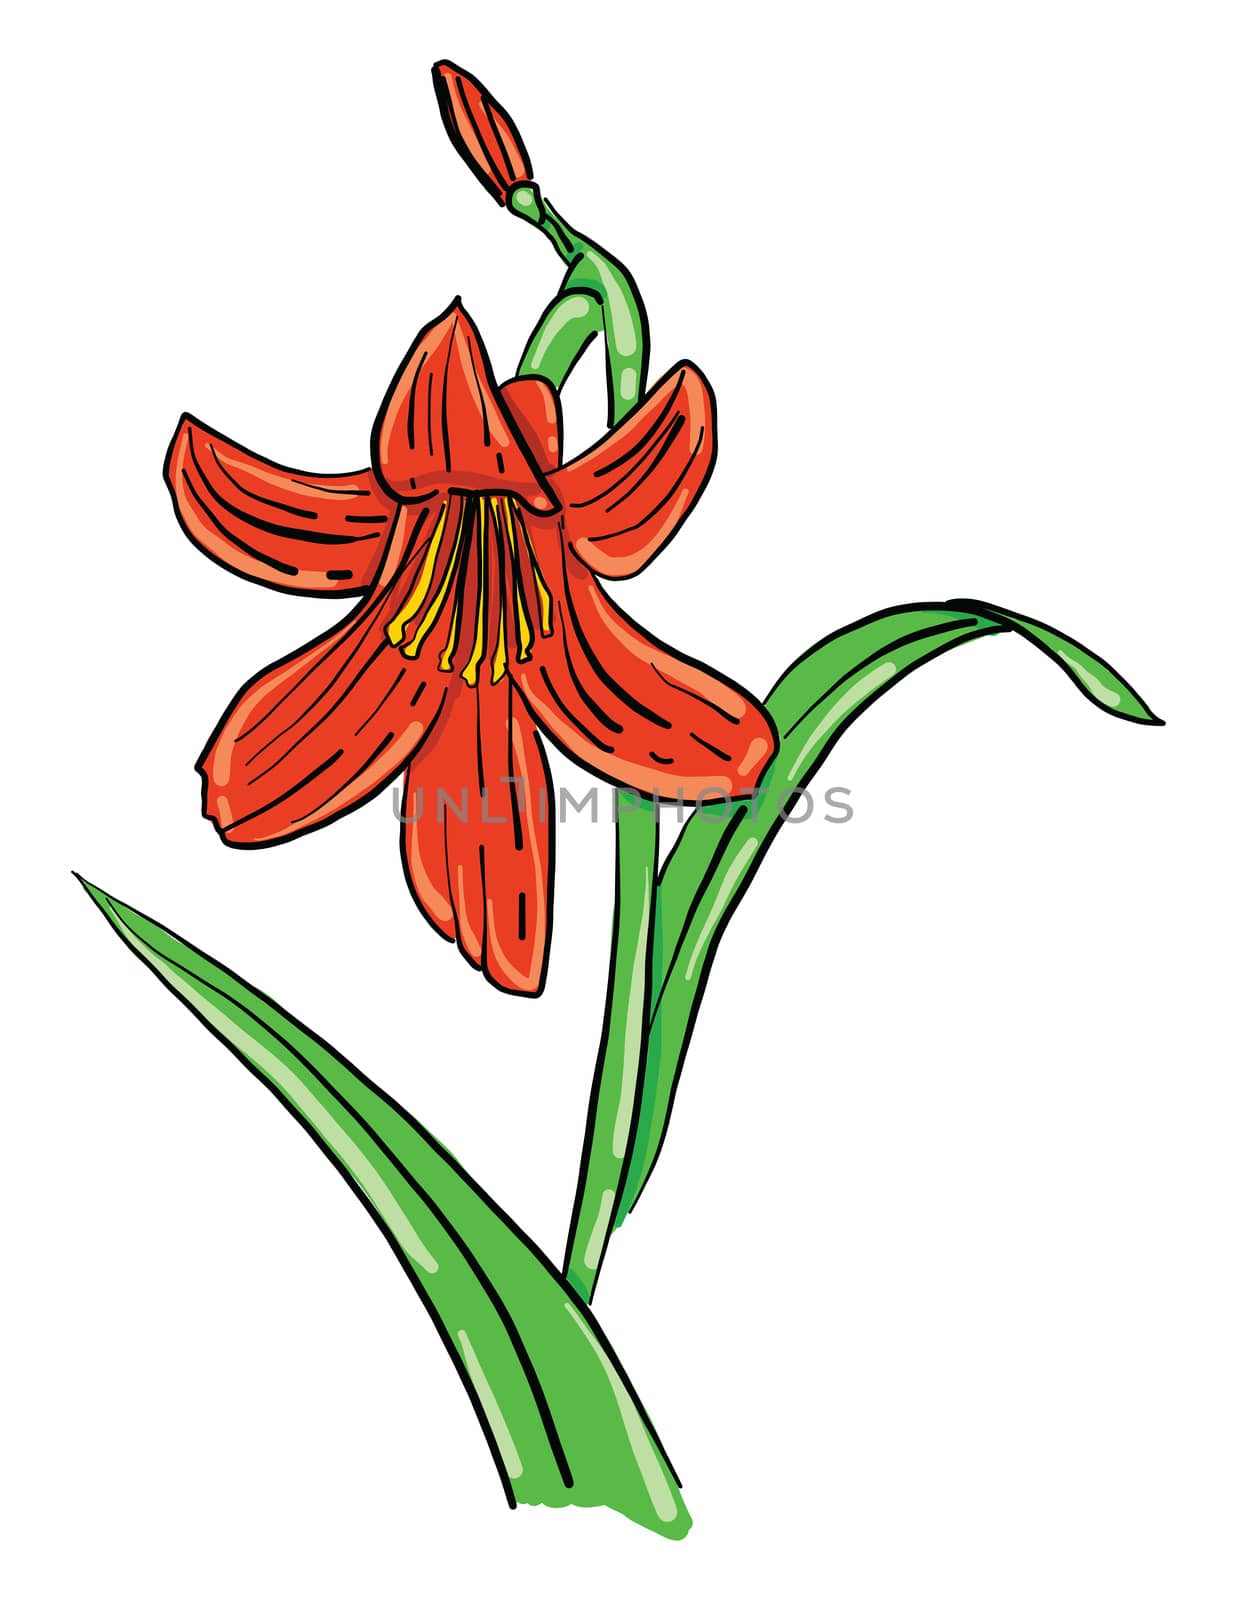 Red lily flower , illustration, vector on white background